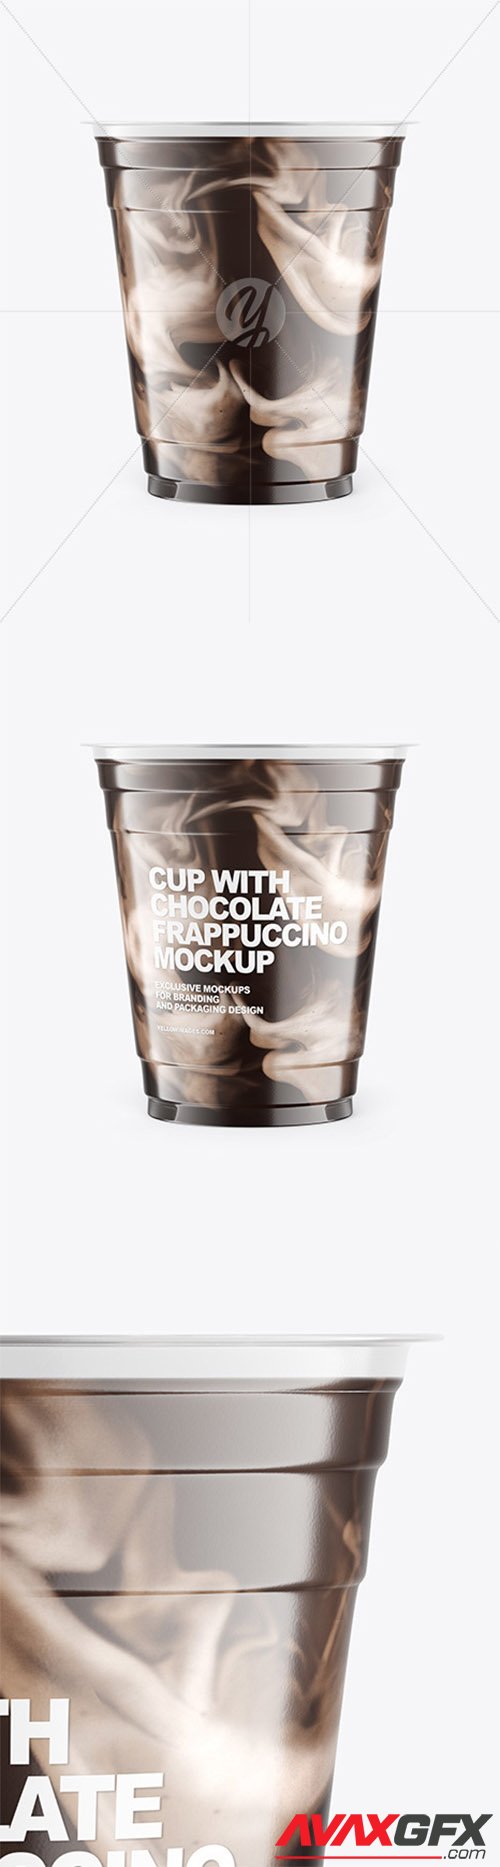 Cup With Chocolate Frappuccino Mockup 68302